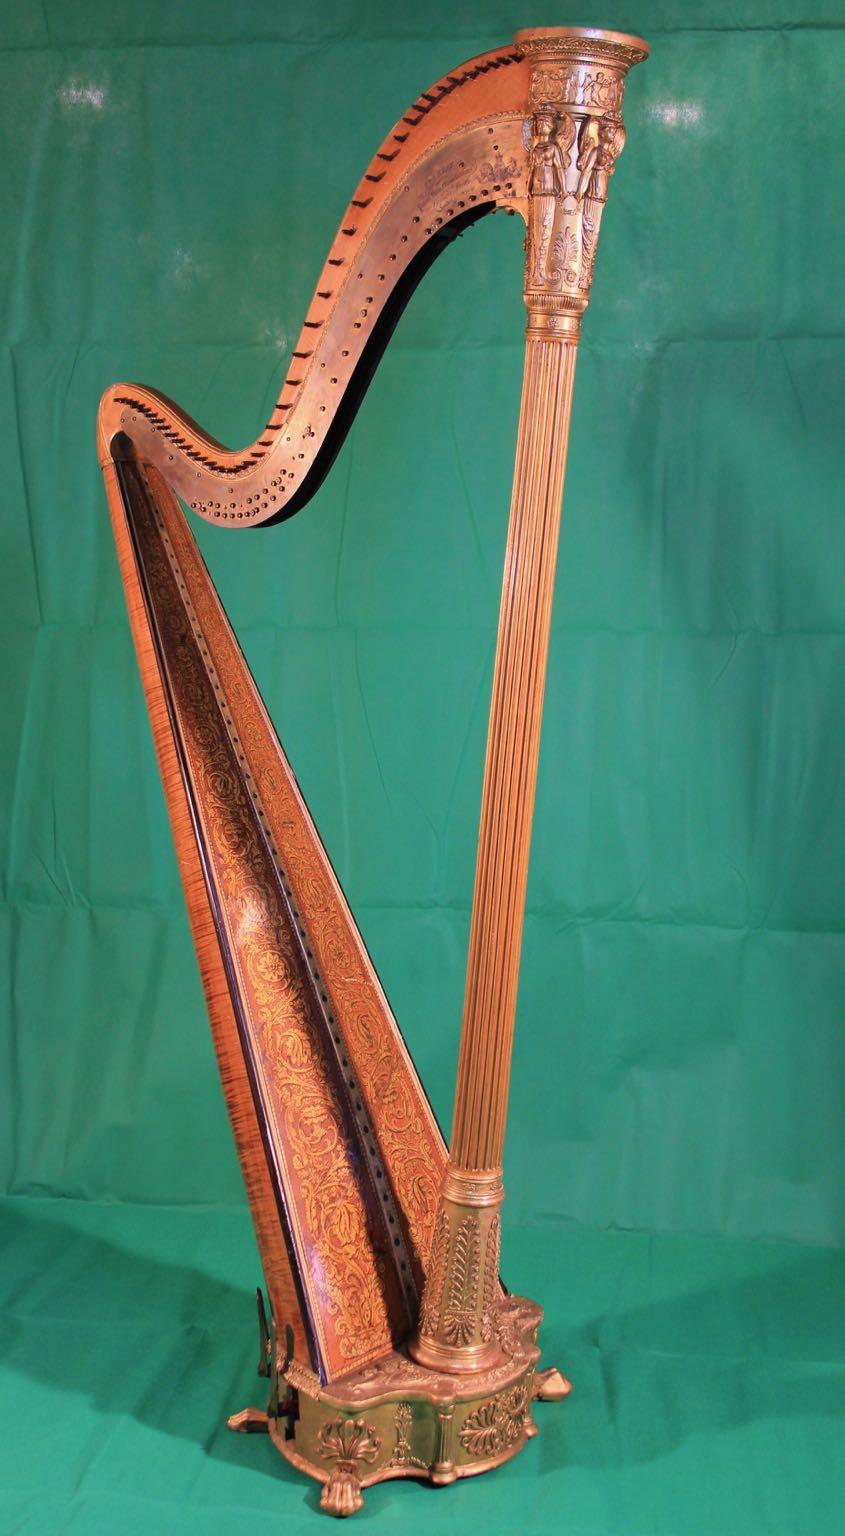 Fantastic English harp, signed I&I Erat, 23 Berners Street London, N° 1656, early 19th century. 

Giltwood and maple with paintings.

Used and played, without strings, not tested.
To be Restored